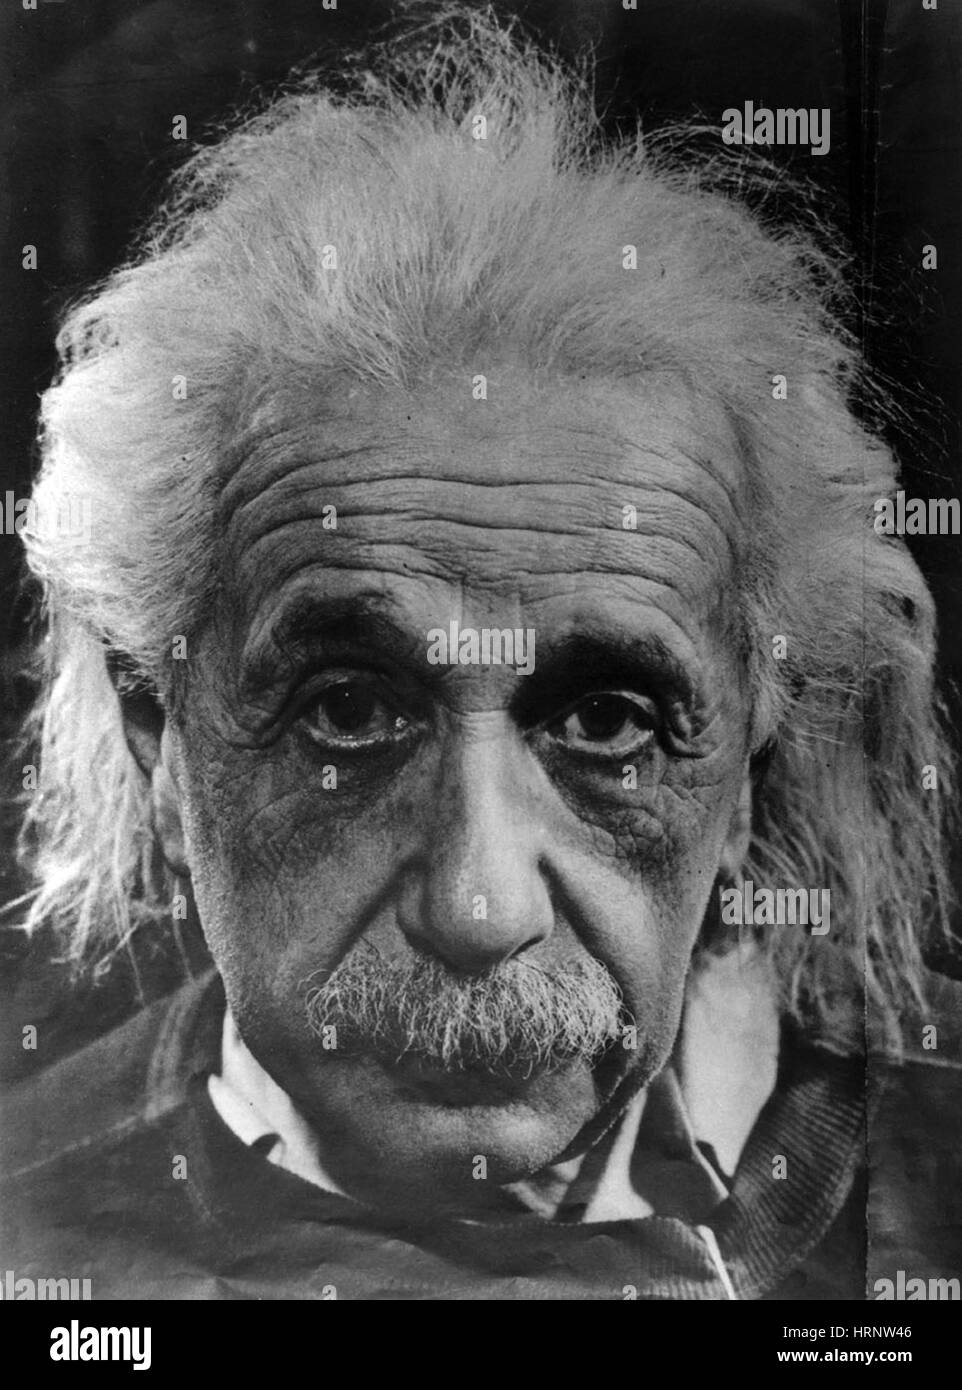 Albert Einstein (March 14, 1879 - April 18, 1955) was a German-born theoretical physicist. He developed the general theory of relativity, one of the two pillars of modern physics. He is best known in popular culture for his mass-energy equivalence formula E = mc2. He received the 1921 Nobel Prize in Physics 'for his services to Theoretical Physics, and especially for his discovery of the law of the photoelectric effect'. Stock Photo